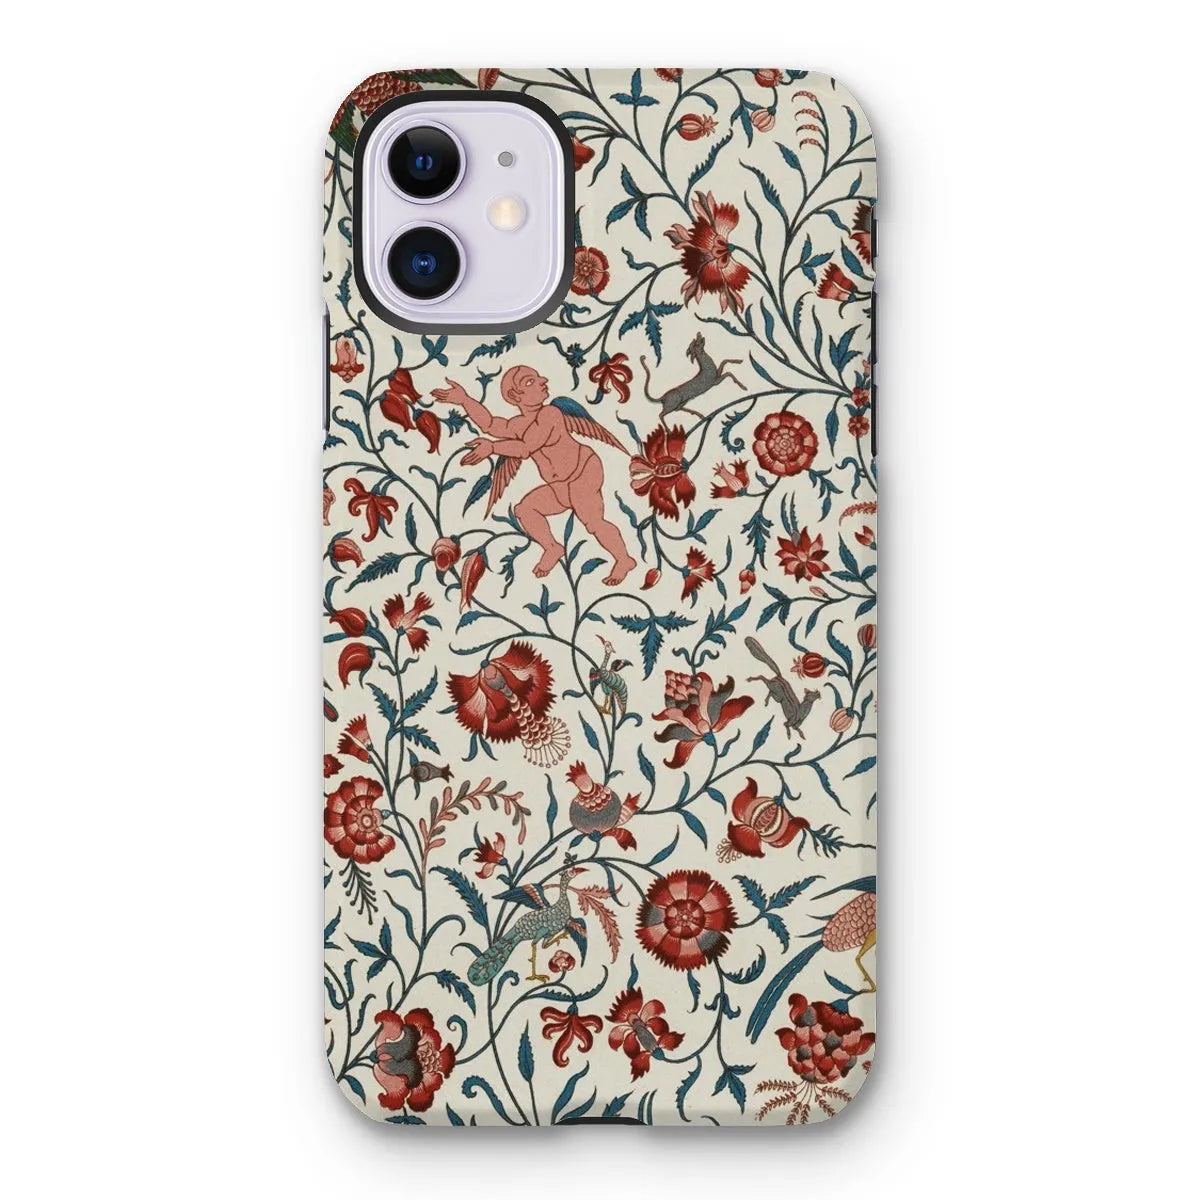 Persian Pattern From L’ornement Polychrome By Auguste Racinet Tough Phone Case - Iphone 11 / Matte - Mobile Phone